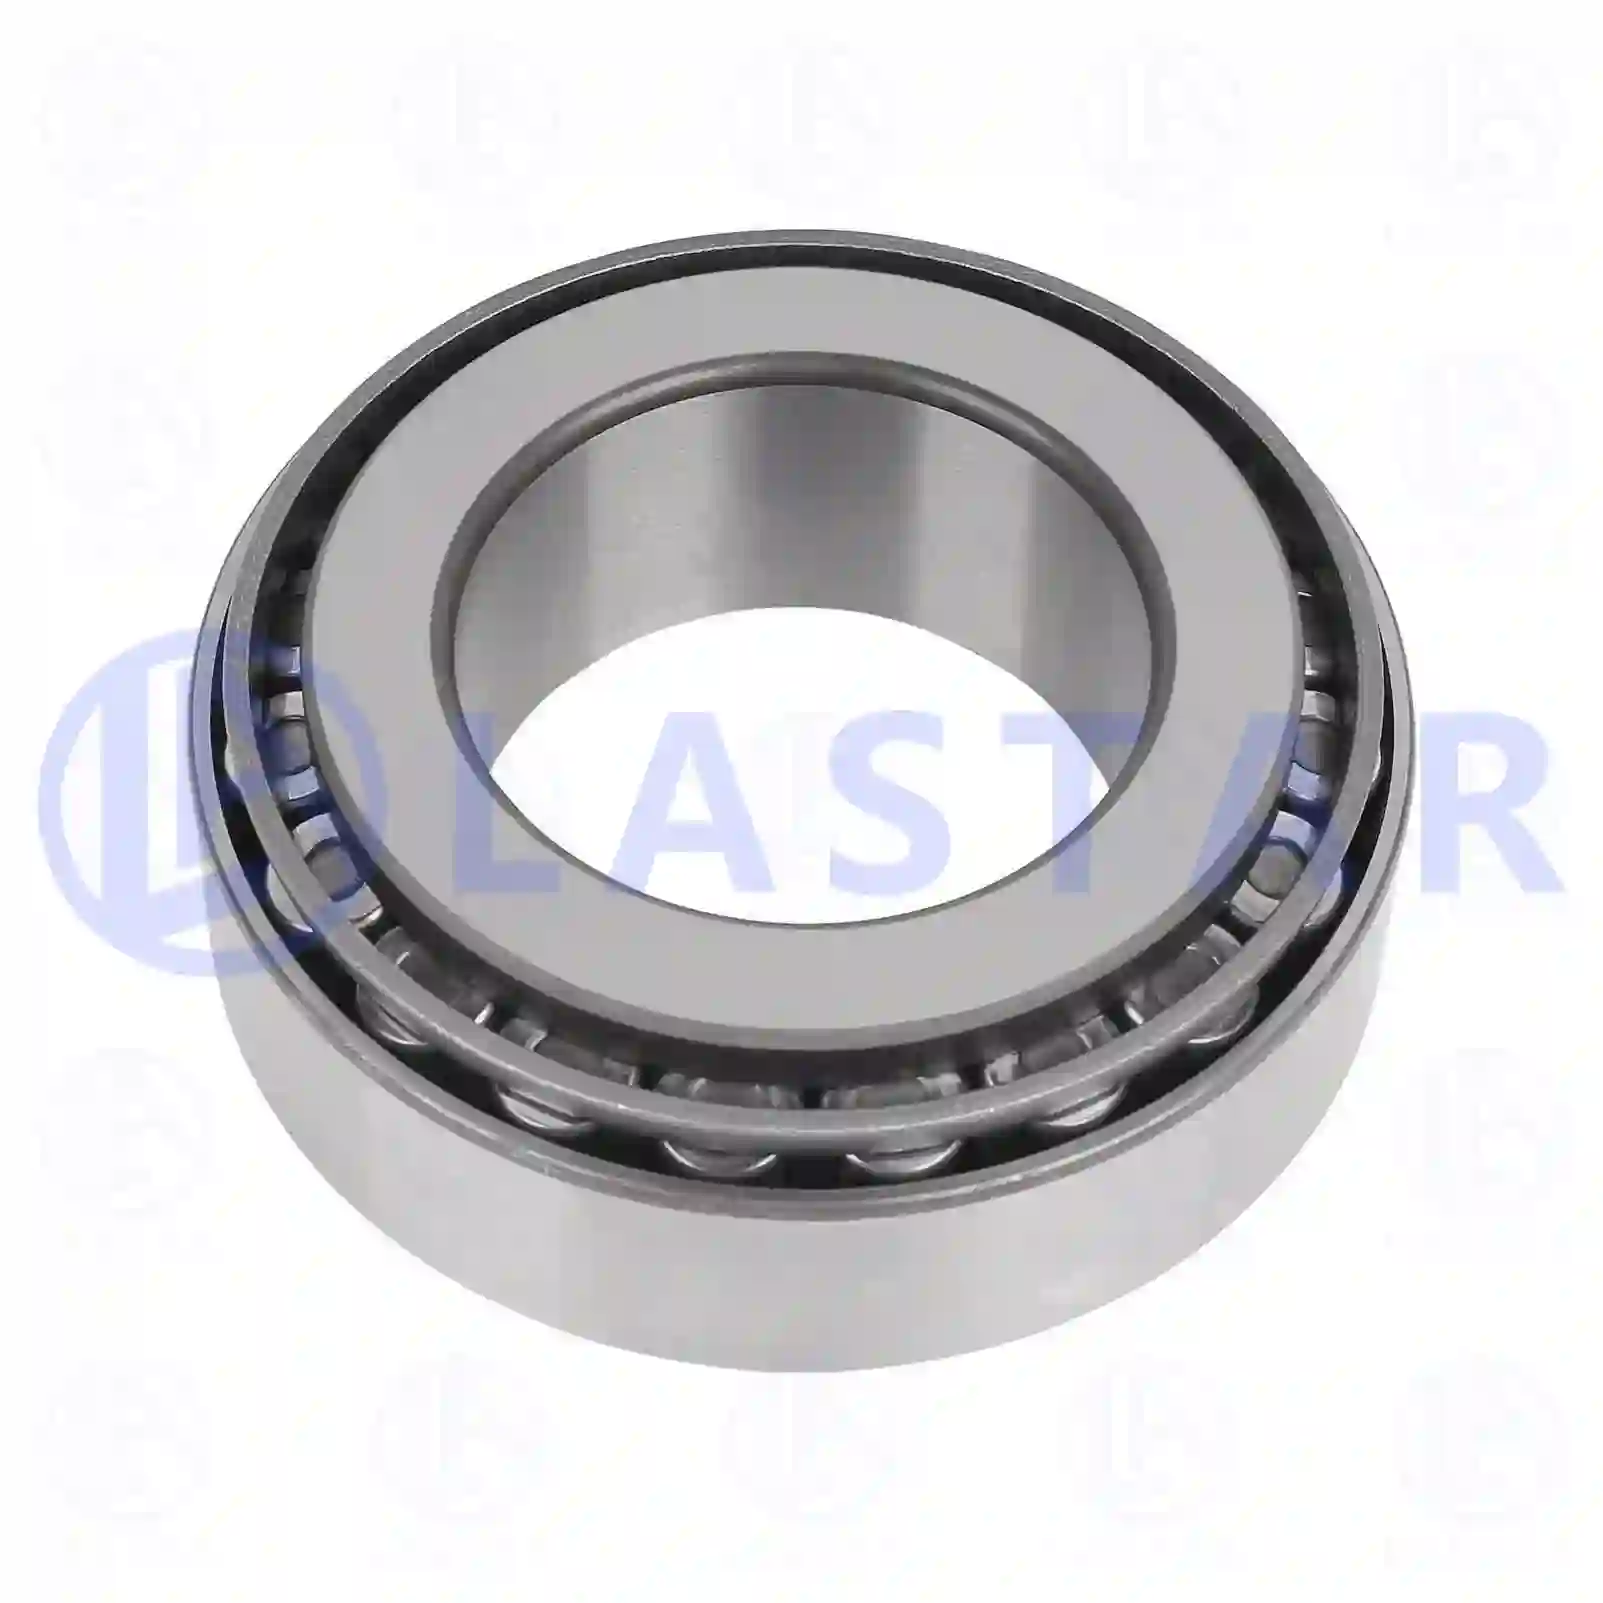 Rear Axle, Complete Tapered roller bearing, la no: 77730935 ,  oem no:005090878, 4207540, TK4207540000, 01103142, 10500503, 710500503, 94050722, 988470101, 988470101A, 1-09812058-0, 1-09812062-0, 01103142, 01905296, 1905296, 26800200, 5010439064, 0009819305, 000720033214, 0019818005, 0039815205, 0039815605, 0039818505, 0049817305, 0069815205, 0069816405, 0023336061, 0023336111, 0959232214, 5000470673, 5000470862, 5000609898, 5010136663, 5010439064, 5010596402, 7401524058, 7401654326, 1524058, 1654326, 183279, 2808510 Lastar Spare Part | Truck Spare Parts, Auotomotive Spare Parts